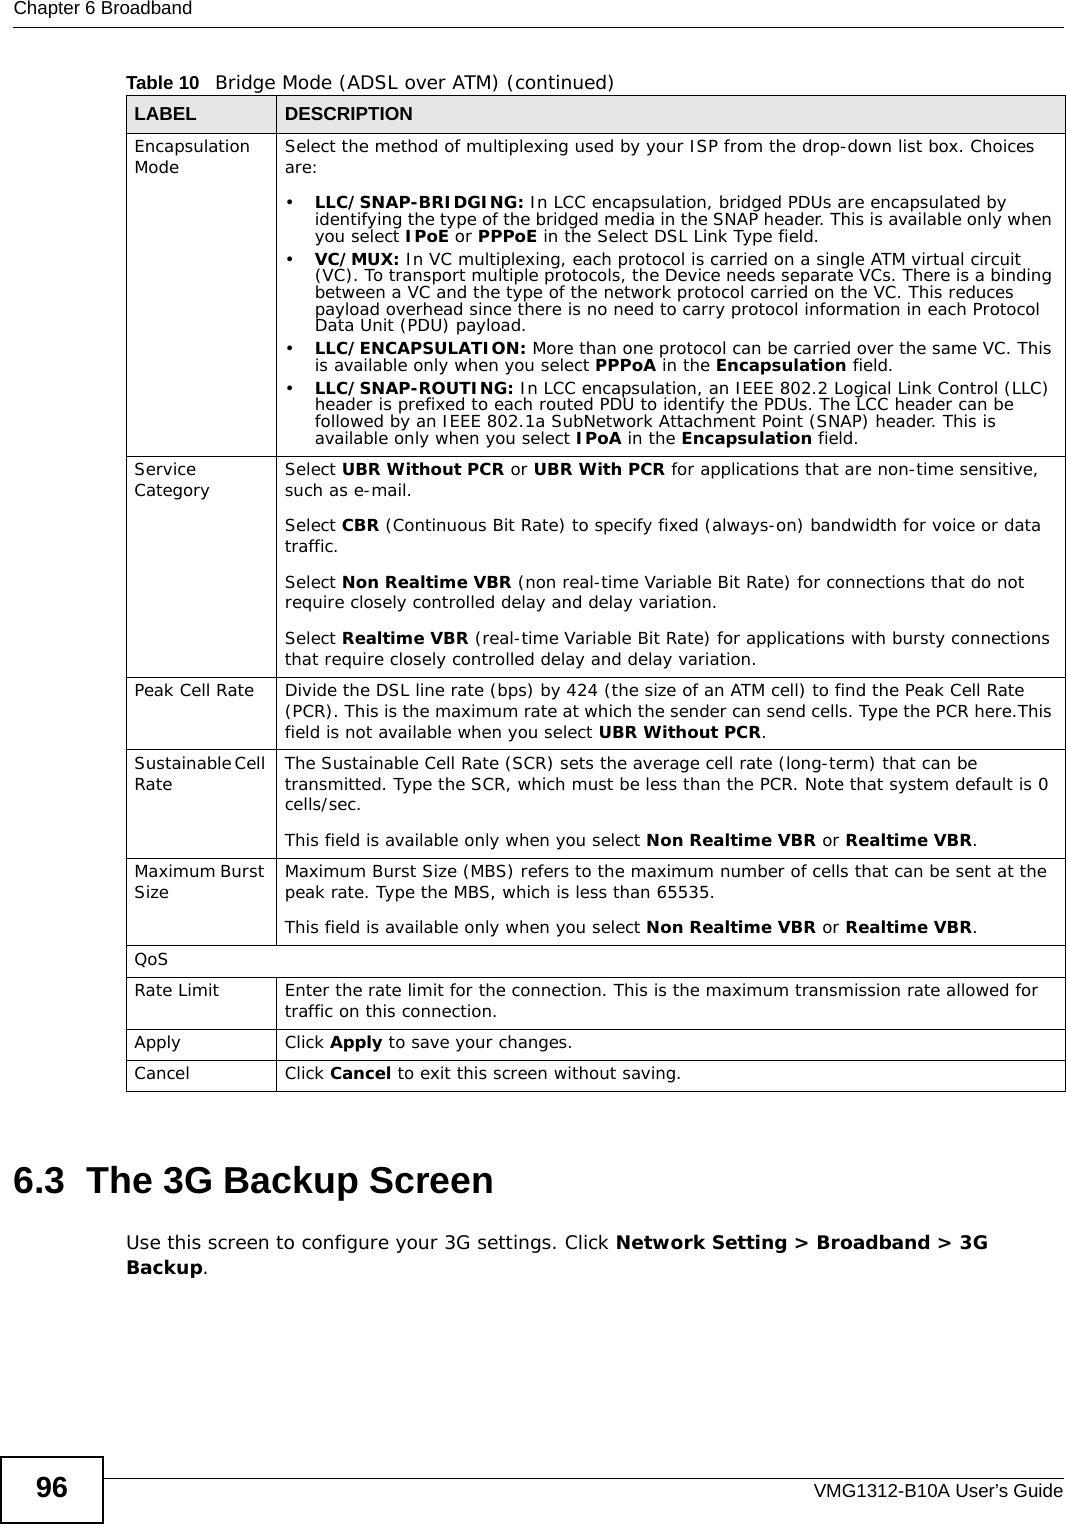 Chapter 6 BroadbandVMG1312-B10A User’s Guide966.3  The 3G Backup ScreenUse this screen to configure your 3G settings. Click Network Setting &gt; Broadband &gt; 3G Backup.Encapsulation Mode Select the method of multiplexing used by your ISP from the drop-down list box. Choices are:•LLC/SNAP-BRIDGING: In LCC encapsulation, bridged PDUs are encapsulated by identifying the type of the bridged media in the SNAP header. This is available only when you select IPoE or PPPoE in the Select DSL Link Type field. •VC/MUX: In VC multiplexing, each protocol is carried on a single ATM virtual circuit (VC). To transport multiple protocols, the Device needs separate VCs. There is a binding between a VC and the type of the network protocol carried on the VC. This reduces payload overhead since there is no need to carry protocol information in each Protocol Data Unit (PDU) payload.•LLC/ENCAPSULATION: More than one protocol can be carried over the same VC. This is available only when you select PPPoA in the Encapsulation field.•LLC/SNAP-ROUTING: In LCC encapsulation, an IEEE 802.2 Logical Link Control (LLC) header is prefixed to each routed PDU to identify the PDUs. The LCC header can be followed by an IEEE 802.1a SubNetwork Attachment Point (SNAP) header. This is available only when you select IPoA in the Encapsulation field. Service Category Select UBR Without PCR or UBR With PCR for applications that are non-time sensitive, such as e-mail. Select CBR (Continuous Bit Rate) to specify fixed (always-on) bandwidth for voice or data traffic. Select Non Realtime VBR (non real-time Variable Bit Rate) for connections that do not require closely controlled delay and delay variation.Select Realtime VBR (real-time Variable Bit Rate) for applications with bursty connections that require closely controlled delay and delay variation. Peak Cell Rate Divide the DSL line rate (bps) by 424 (the size of an ATM cell) to find the Peak Cell Rate (PCR). This is the maximum rate at which the sender can send cells. Type the PCR here.This field is not available when you select UBR Without PCR.Sustainable Cell Rate The Sustainable Cell Rate (SCR) sets the average cell rate (long-term) that can be transmitted. Type the SCR, which must be less than the PCR. Note that system default is 0 cells/sec. This field is available only when you select Non Realtime VBR or Realtime VBR.Maximum Burst Size Maximum Burst Size (MBS) refers to the maximum number of cells that can be sent at the peak rate. Type the MBS, which is less than 65535.This field is available only when you select Non Realtime VBR or Realtime VBR.QoSRate Limit Enter the rate limit for the connection. This is the maximum transmission rate allowed for traffic on this connection.Apply Click Apply to save your changes.Cancel Click Cancel to exit this screen without saving.Table 10   Bridge Mode (ADSL over ATM) (continued)LABEL DESCRIPTION